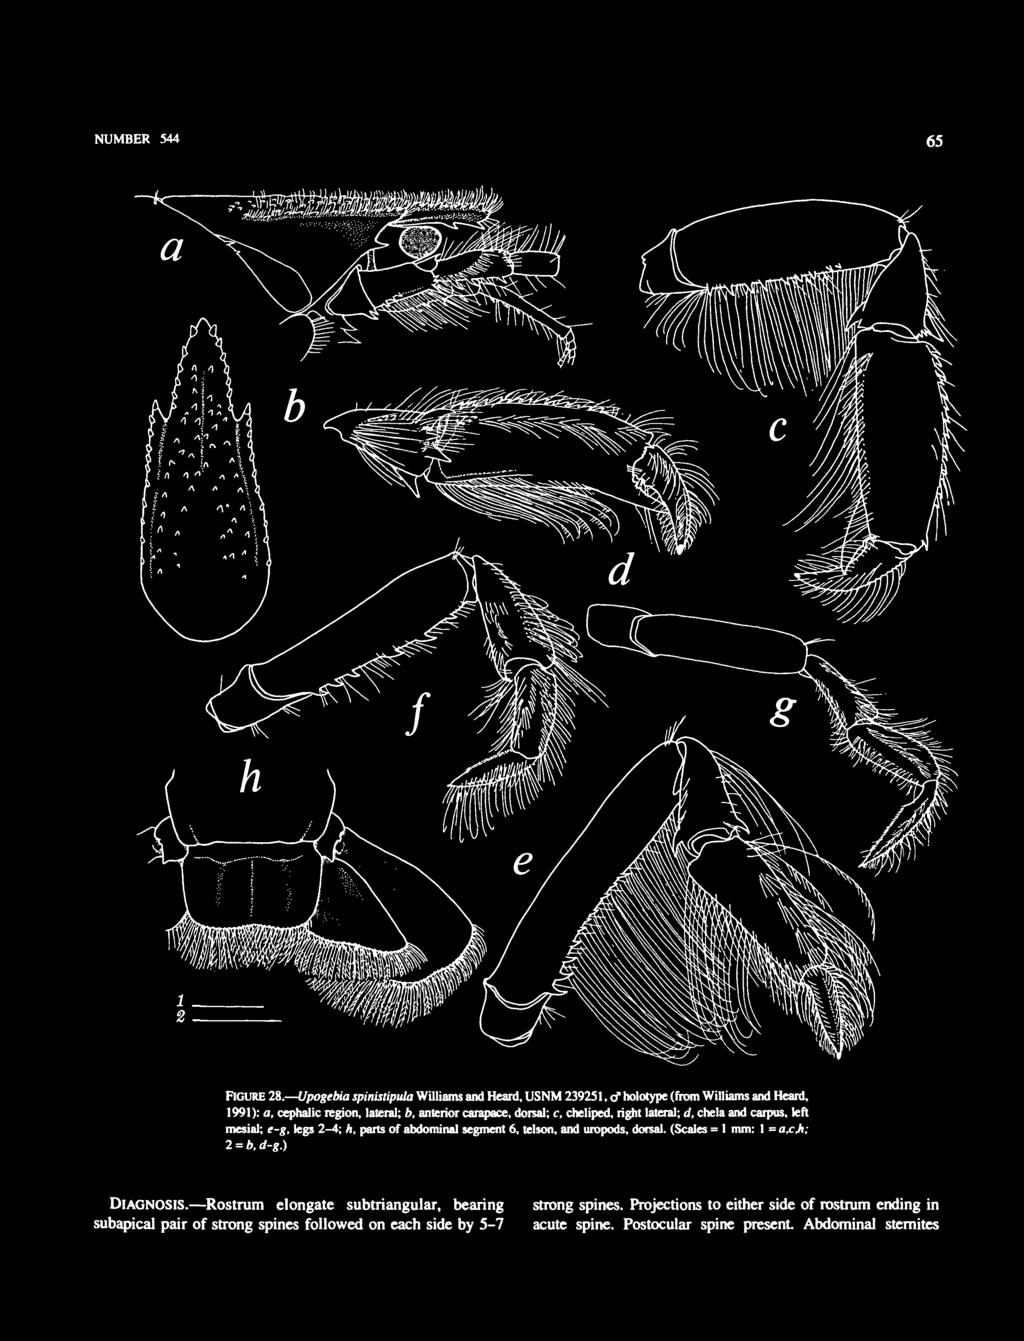 carapace, dorsal; c, cheliped, right lateral; d, chela and carpus, left mesial; e-g, legs 2-4; h, parts of abdominal segment 6, telson, and uropods,